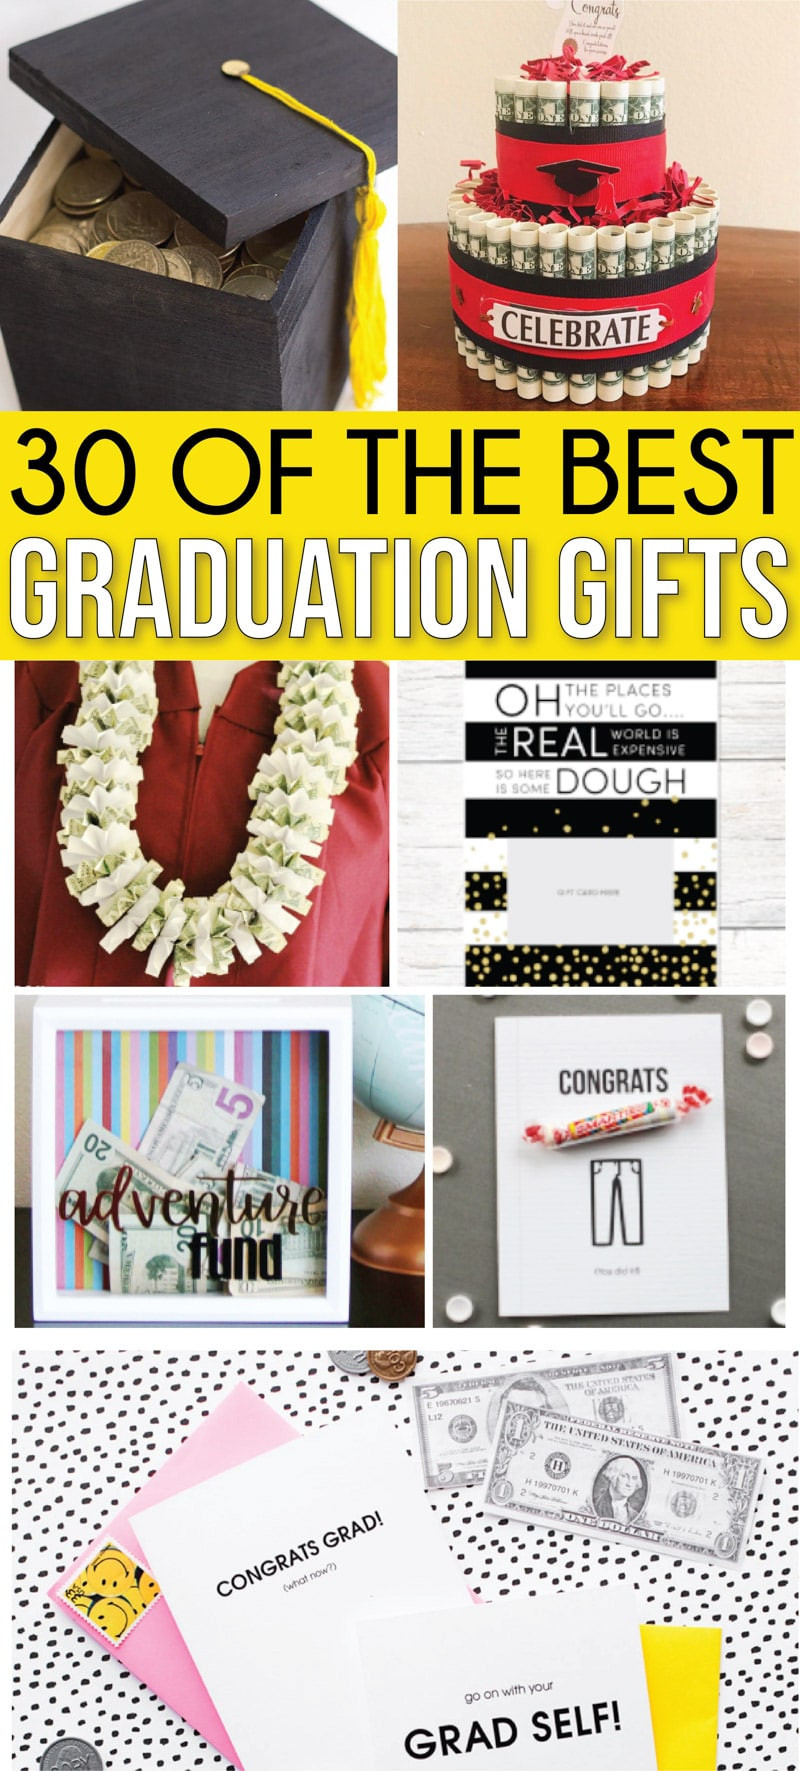 Cool Graduation Gift Ideas
 30 Awesome High School Graduation Gifts Graduates Actually